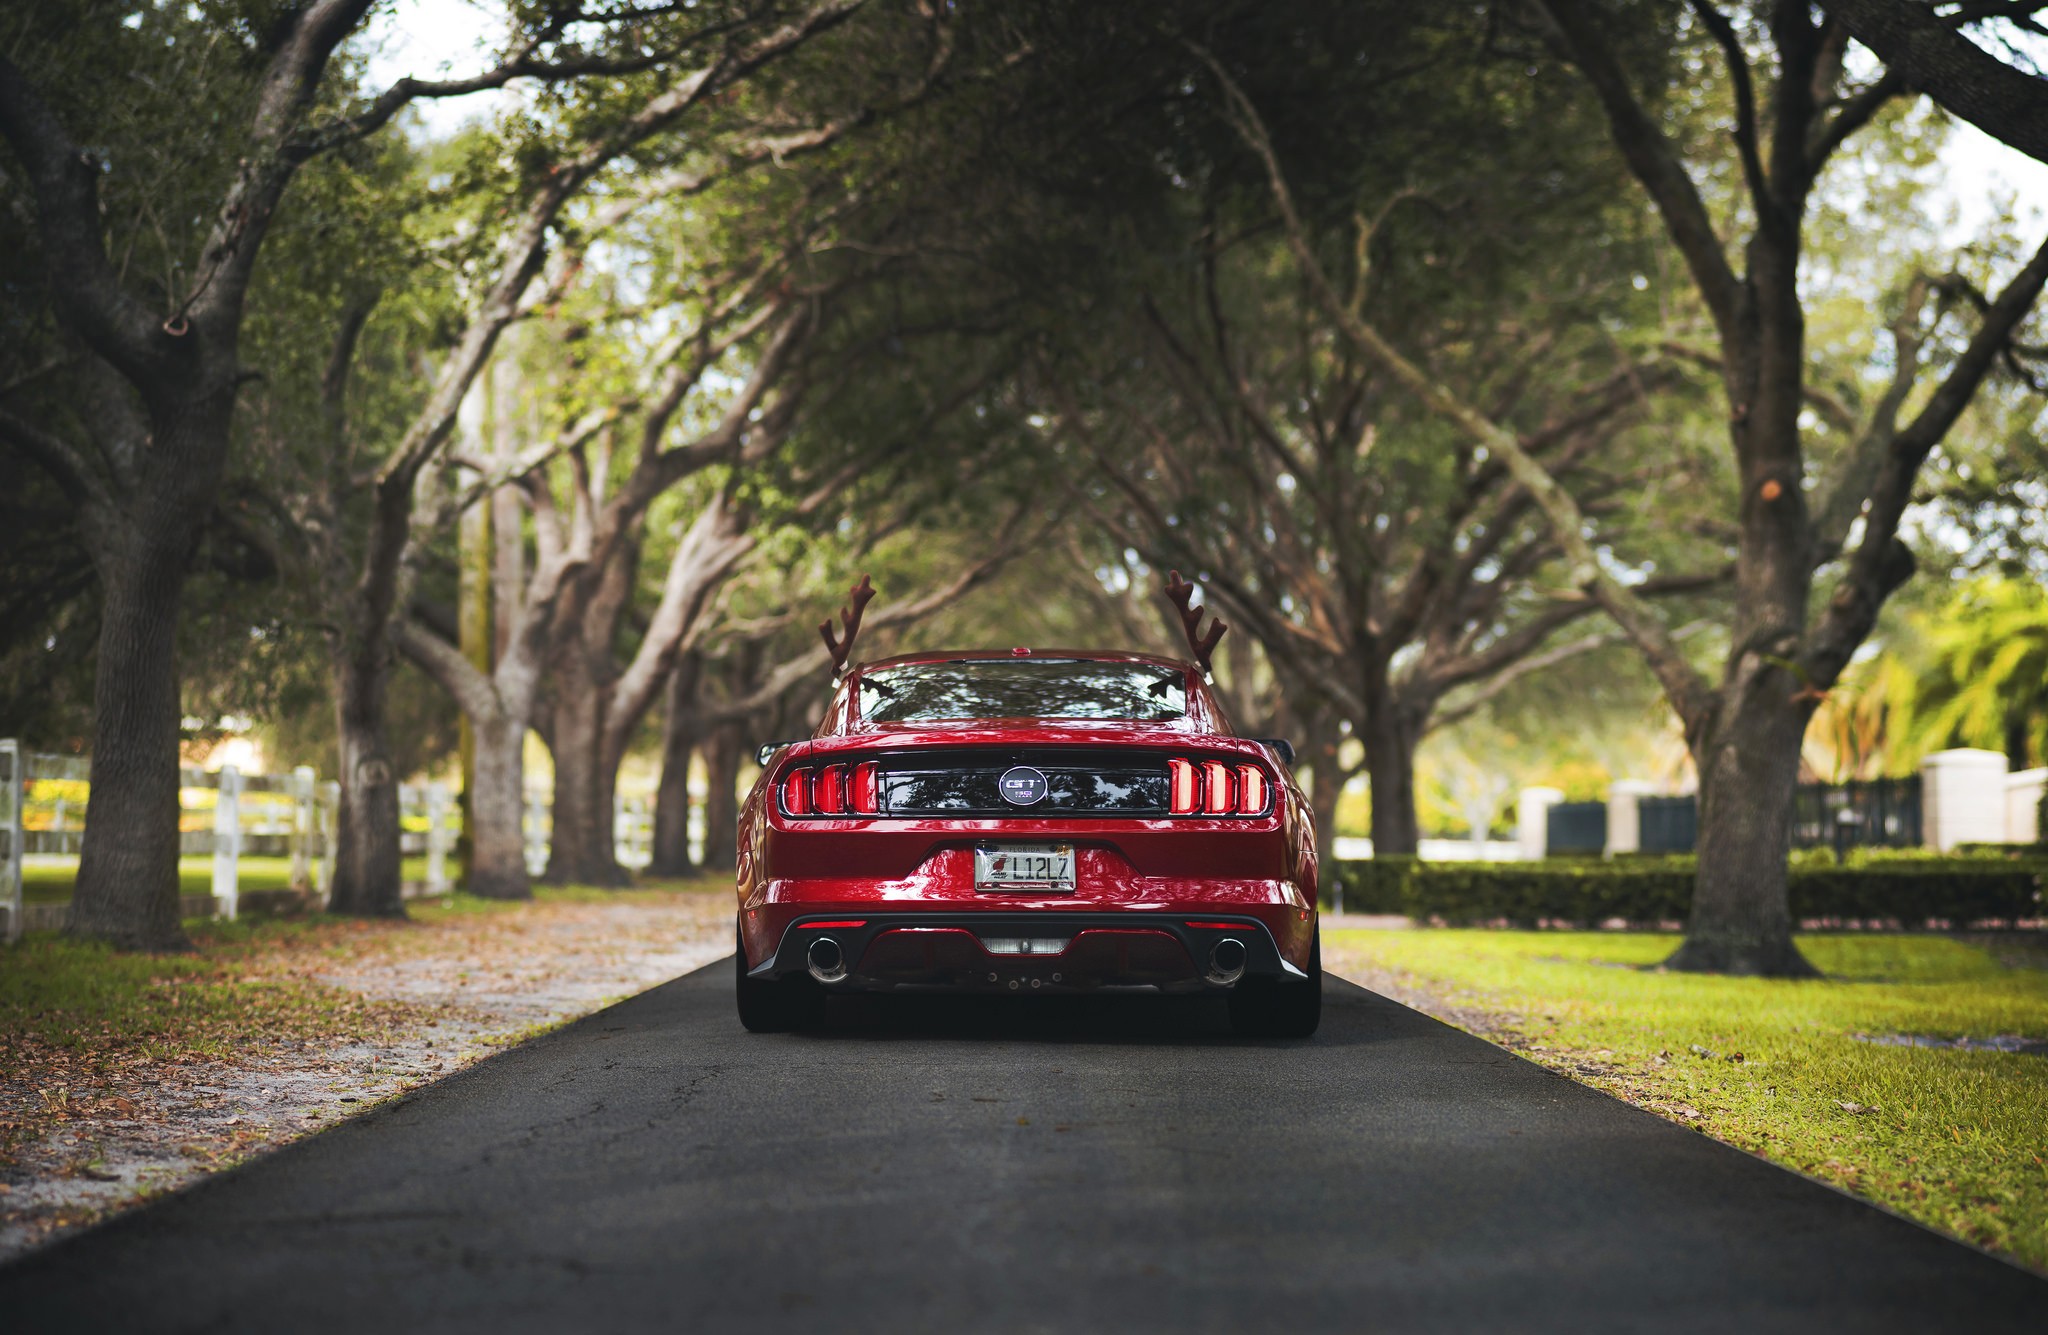 General 2048x1335 Ford nature rear view Ford Mustang Shelby muscle cars car Ford Mustang Ford Mustang S550 American cars